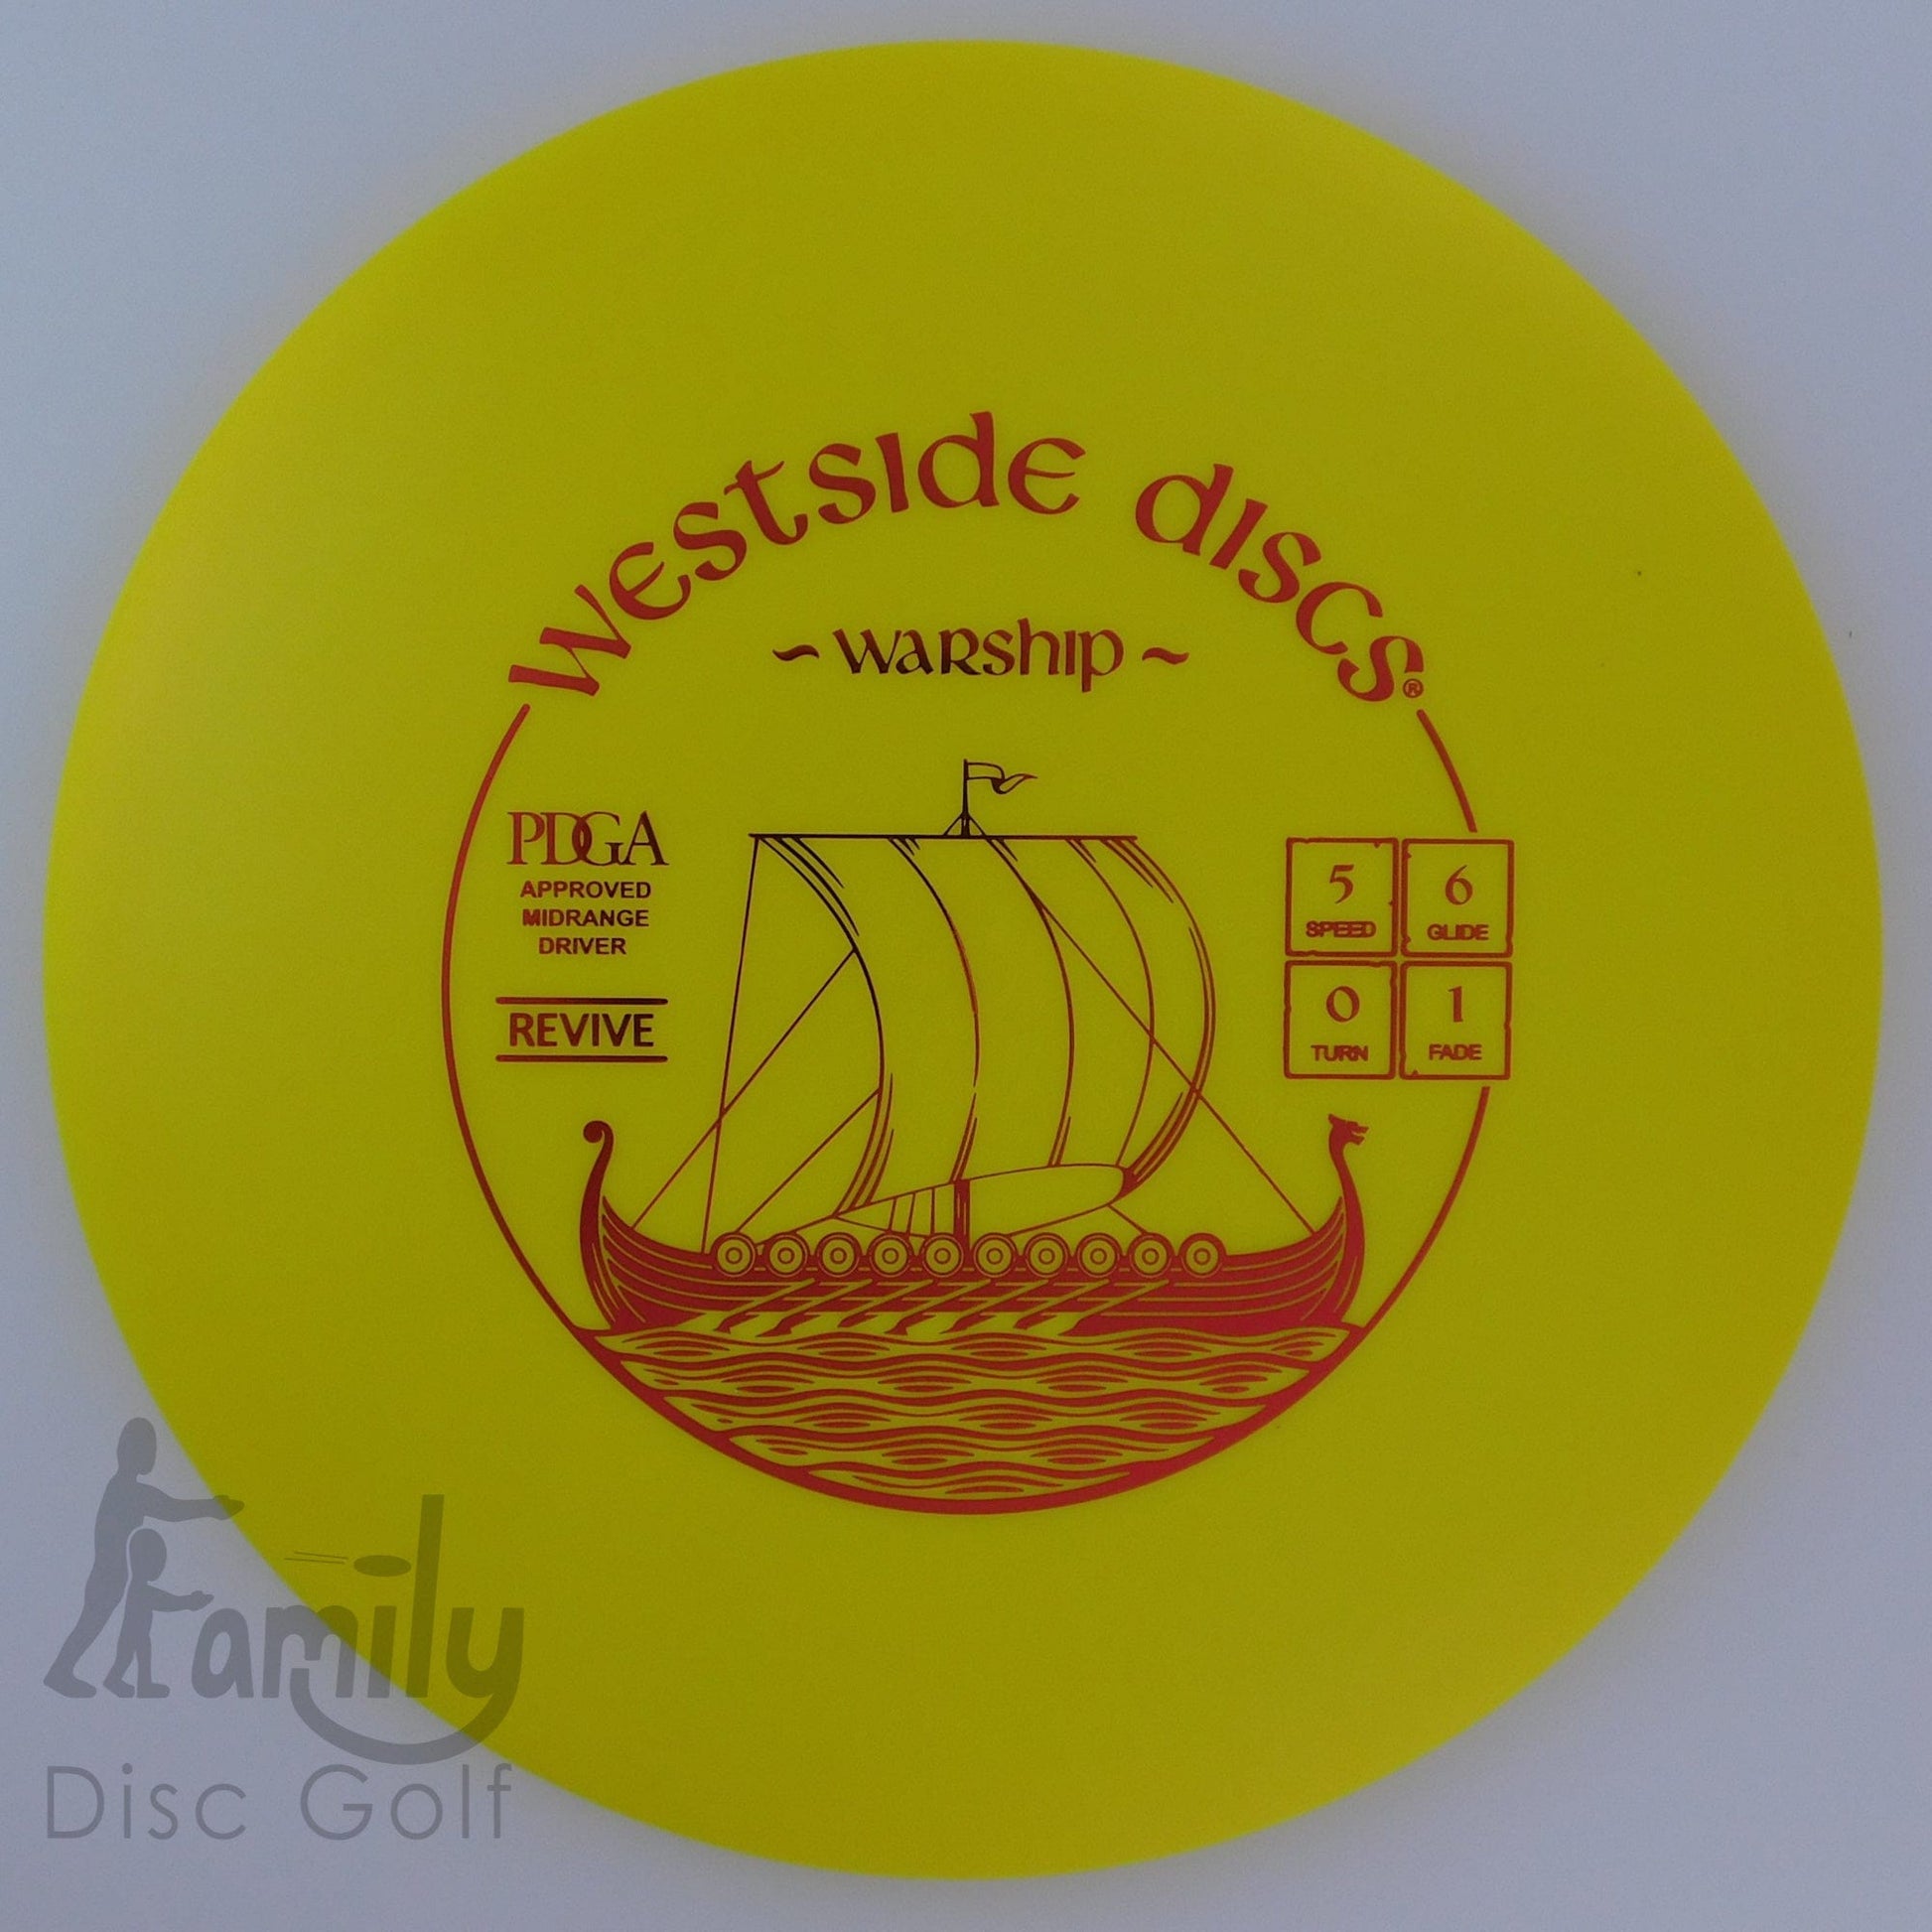 Westside Discs Warship - Revive 5│6│0│1 179g - Yellow - Westside Discs Warship - Revive - 101384